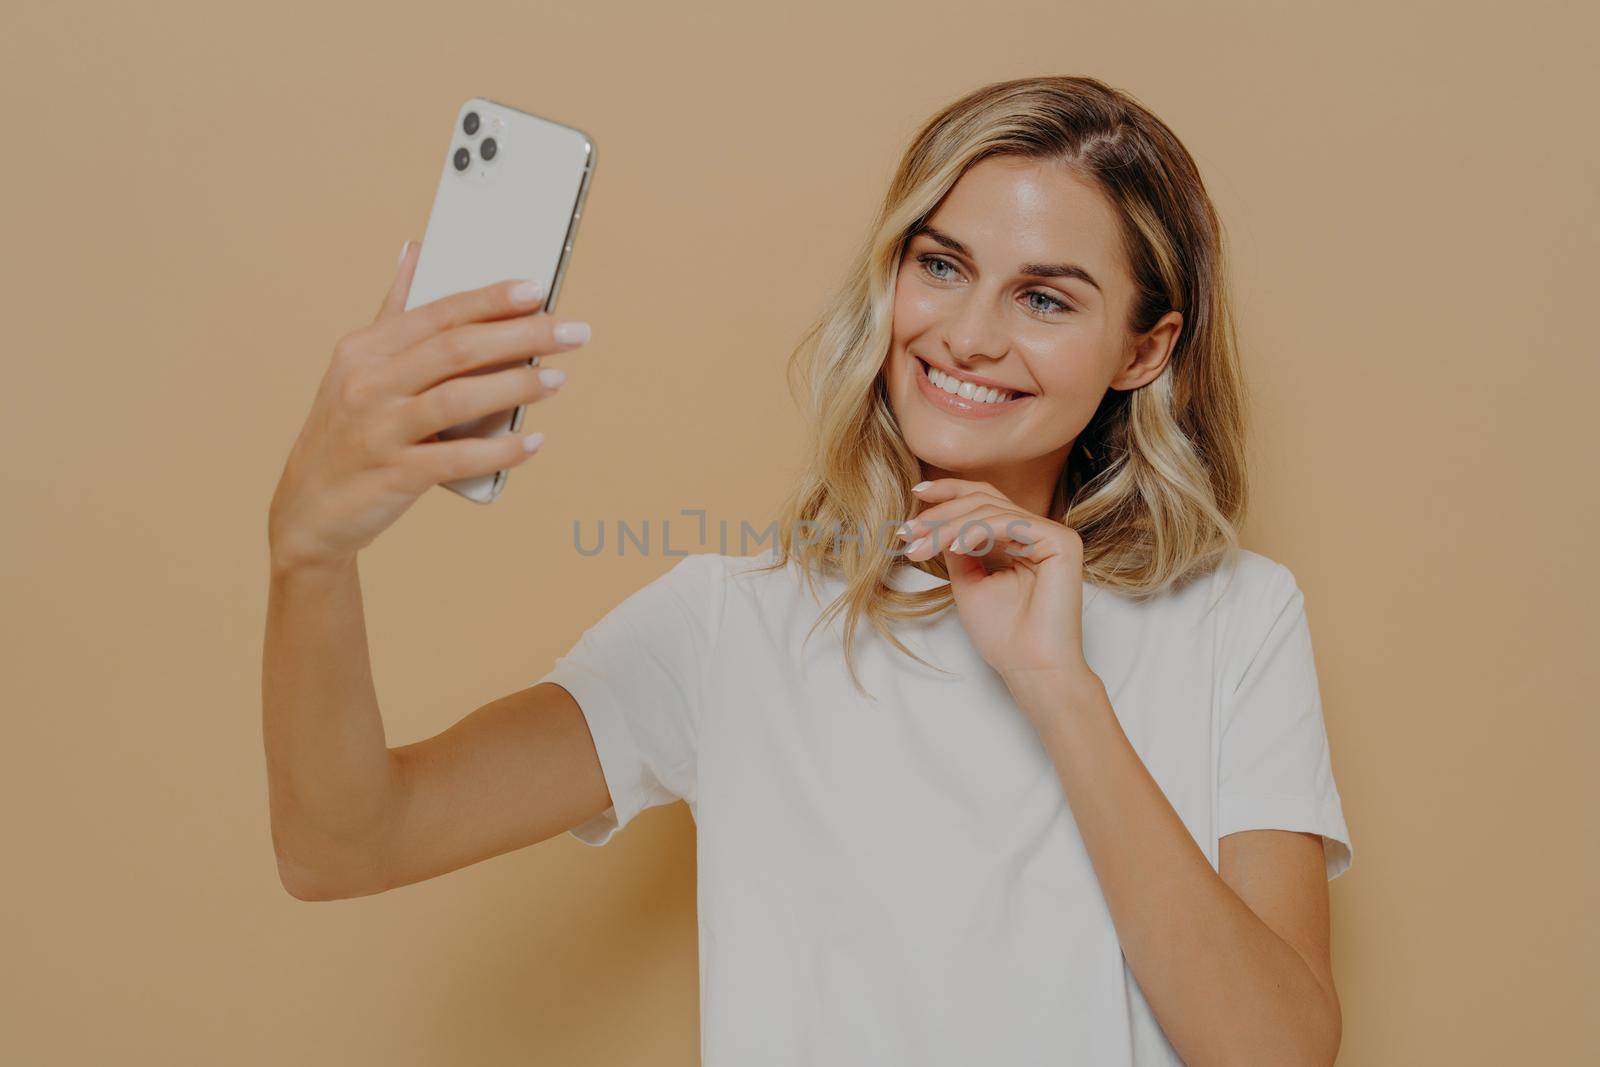 Cute lovely female with blonde hair making selfie on modern mobile phone and smiling, taking picture of herself for boyfriend while posing against nude background in studio. Dressed in white tshirt